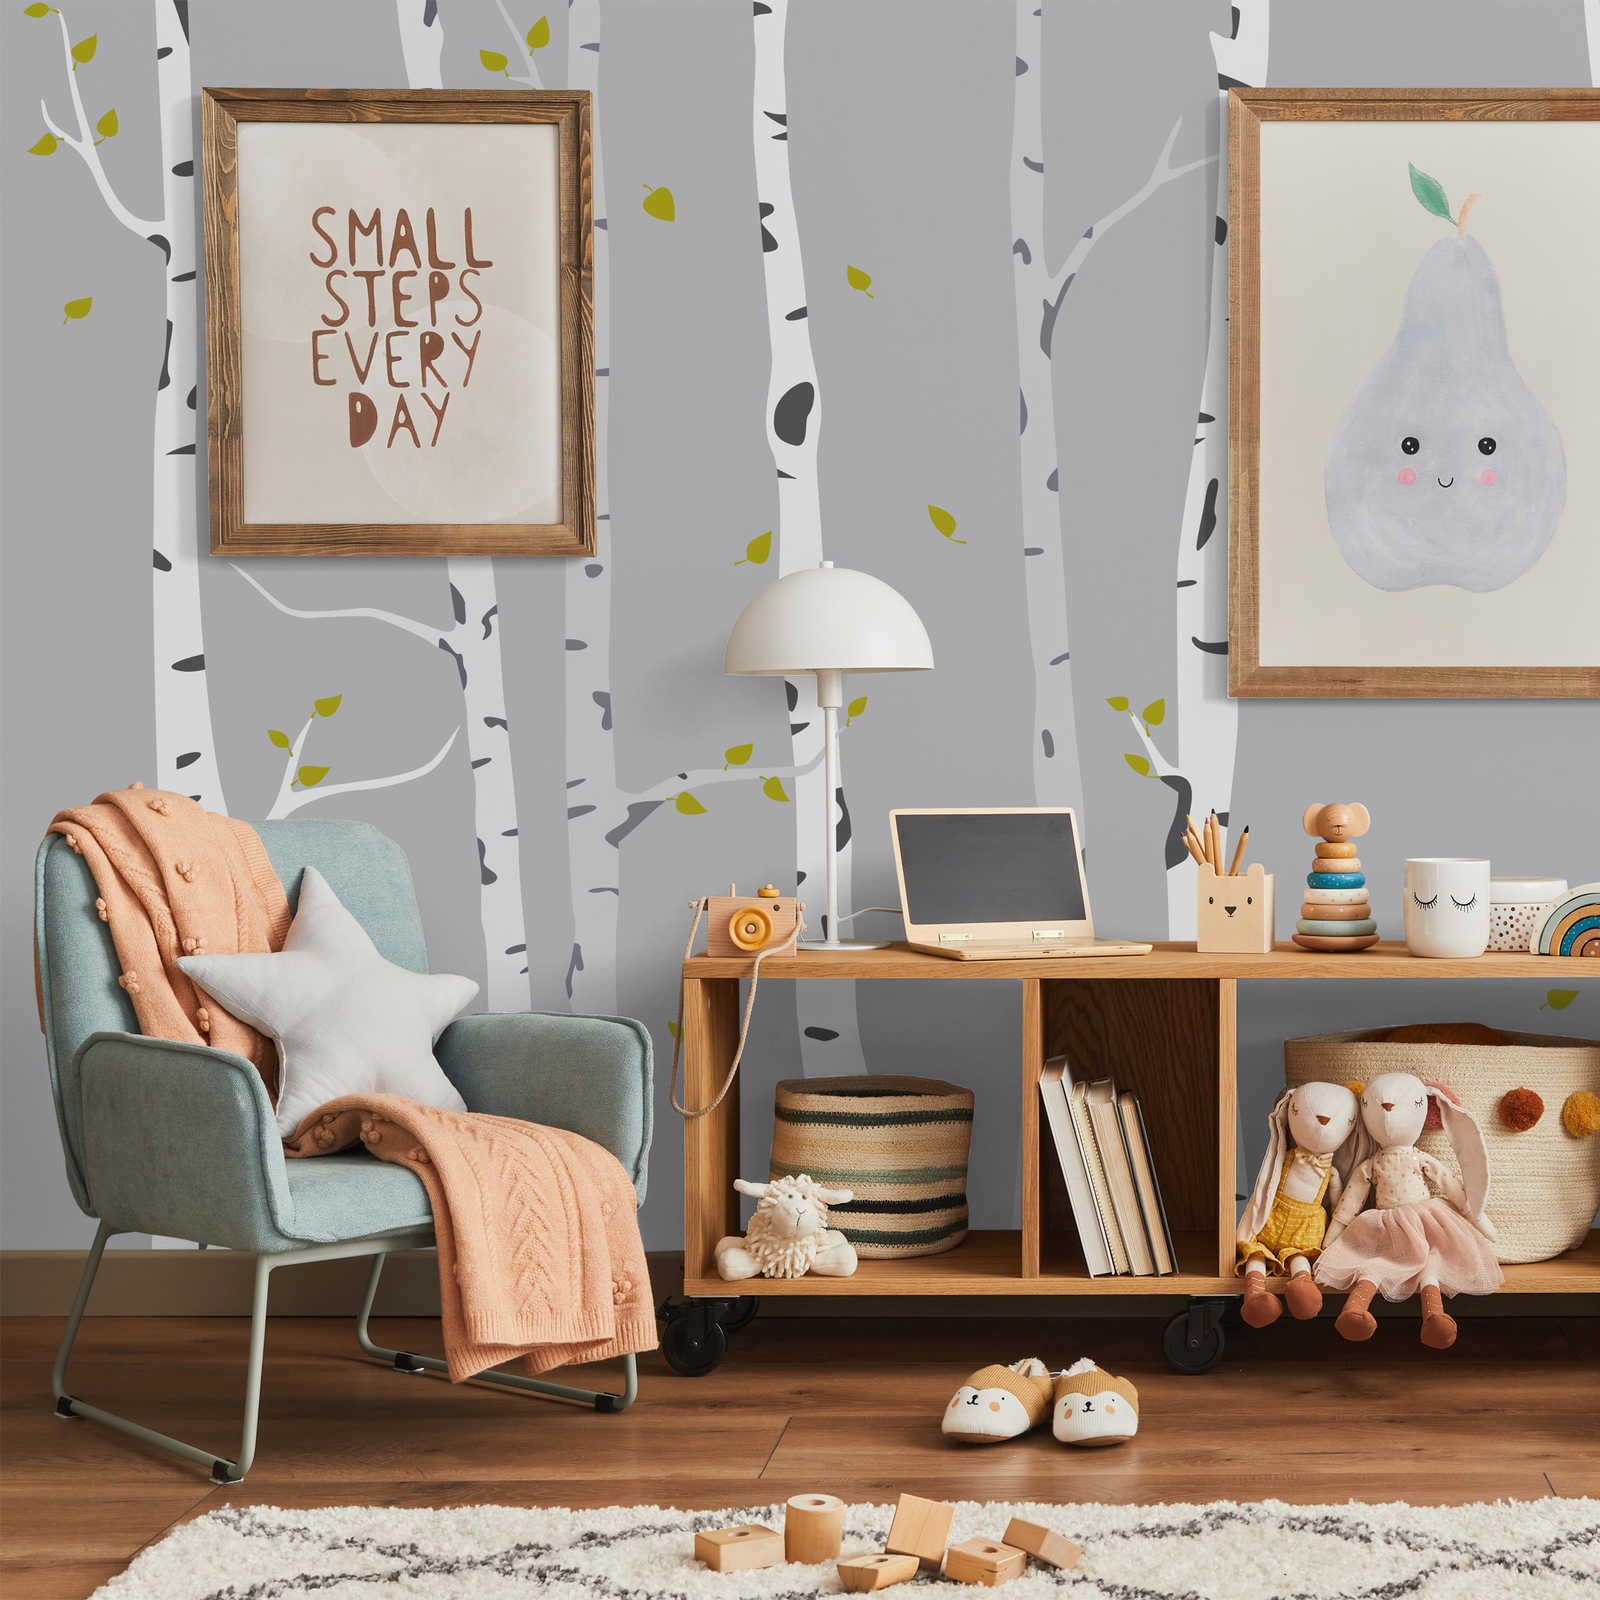 Photo wallpaper with painted birch forest for children's room - Smooth & slightly shiny non-woven
